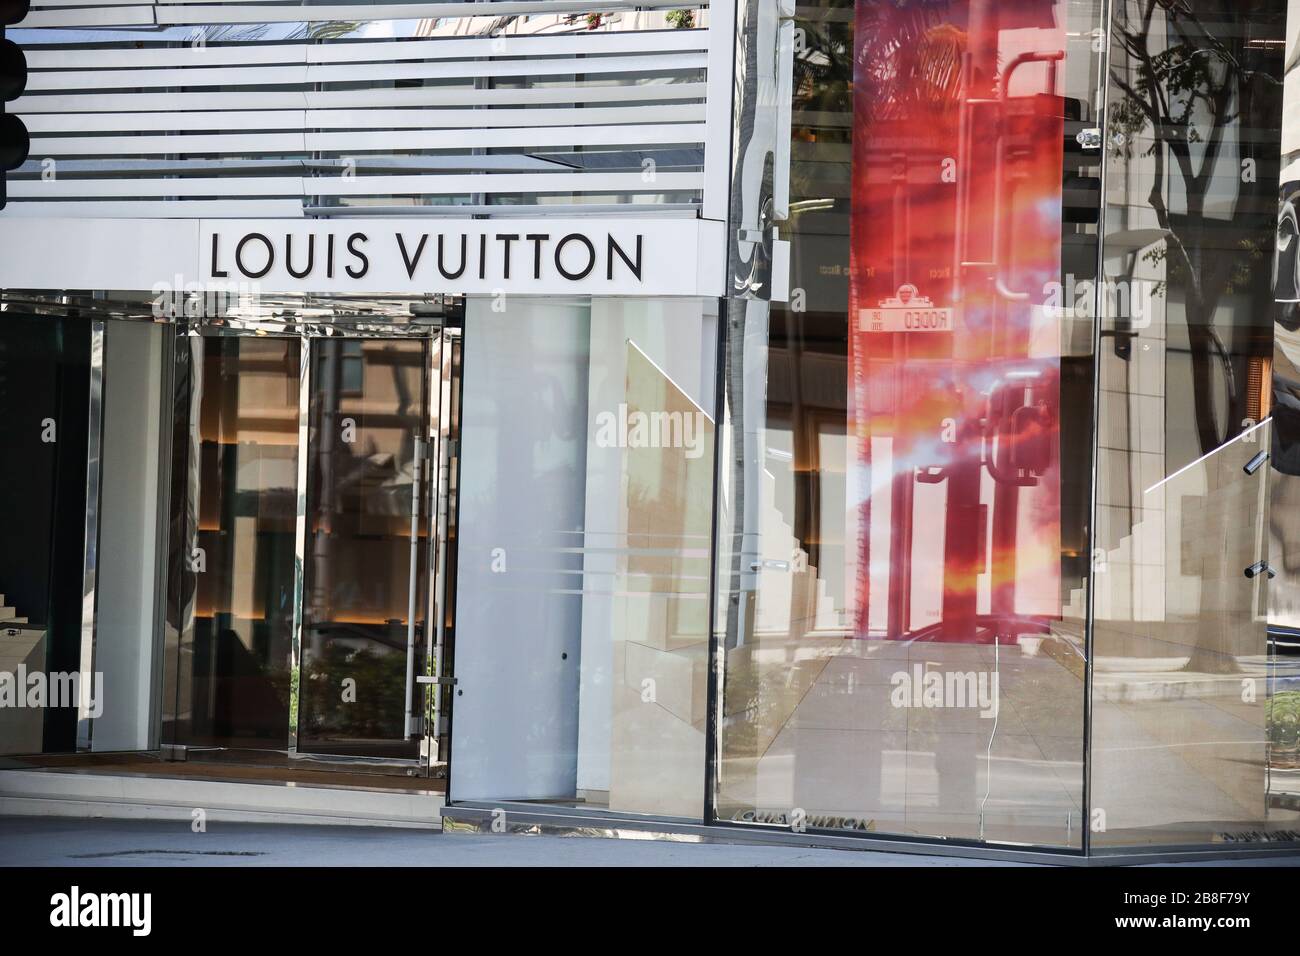 Rapper T.I. shopping at Louis Vuitton on Rodeo Drive in Beverly Hills Los  Angeles, California - 26.04.10 Stock Photo - Alamy